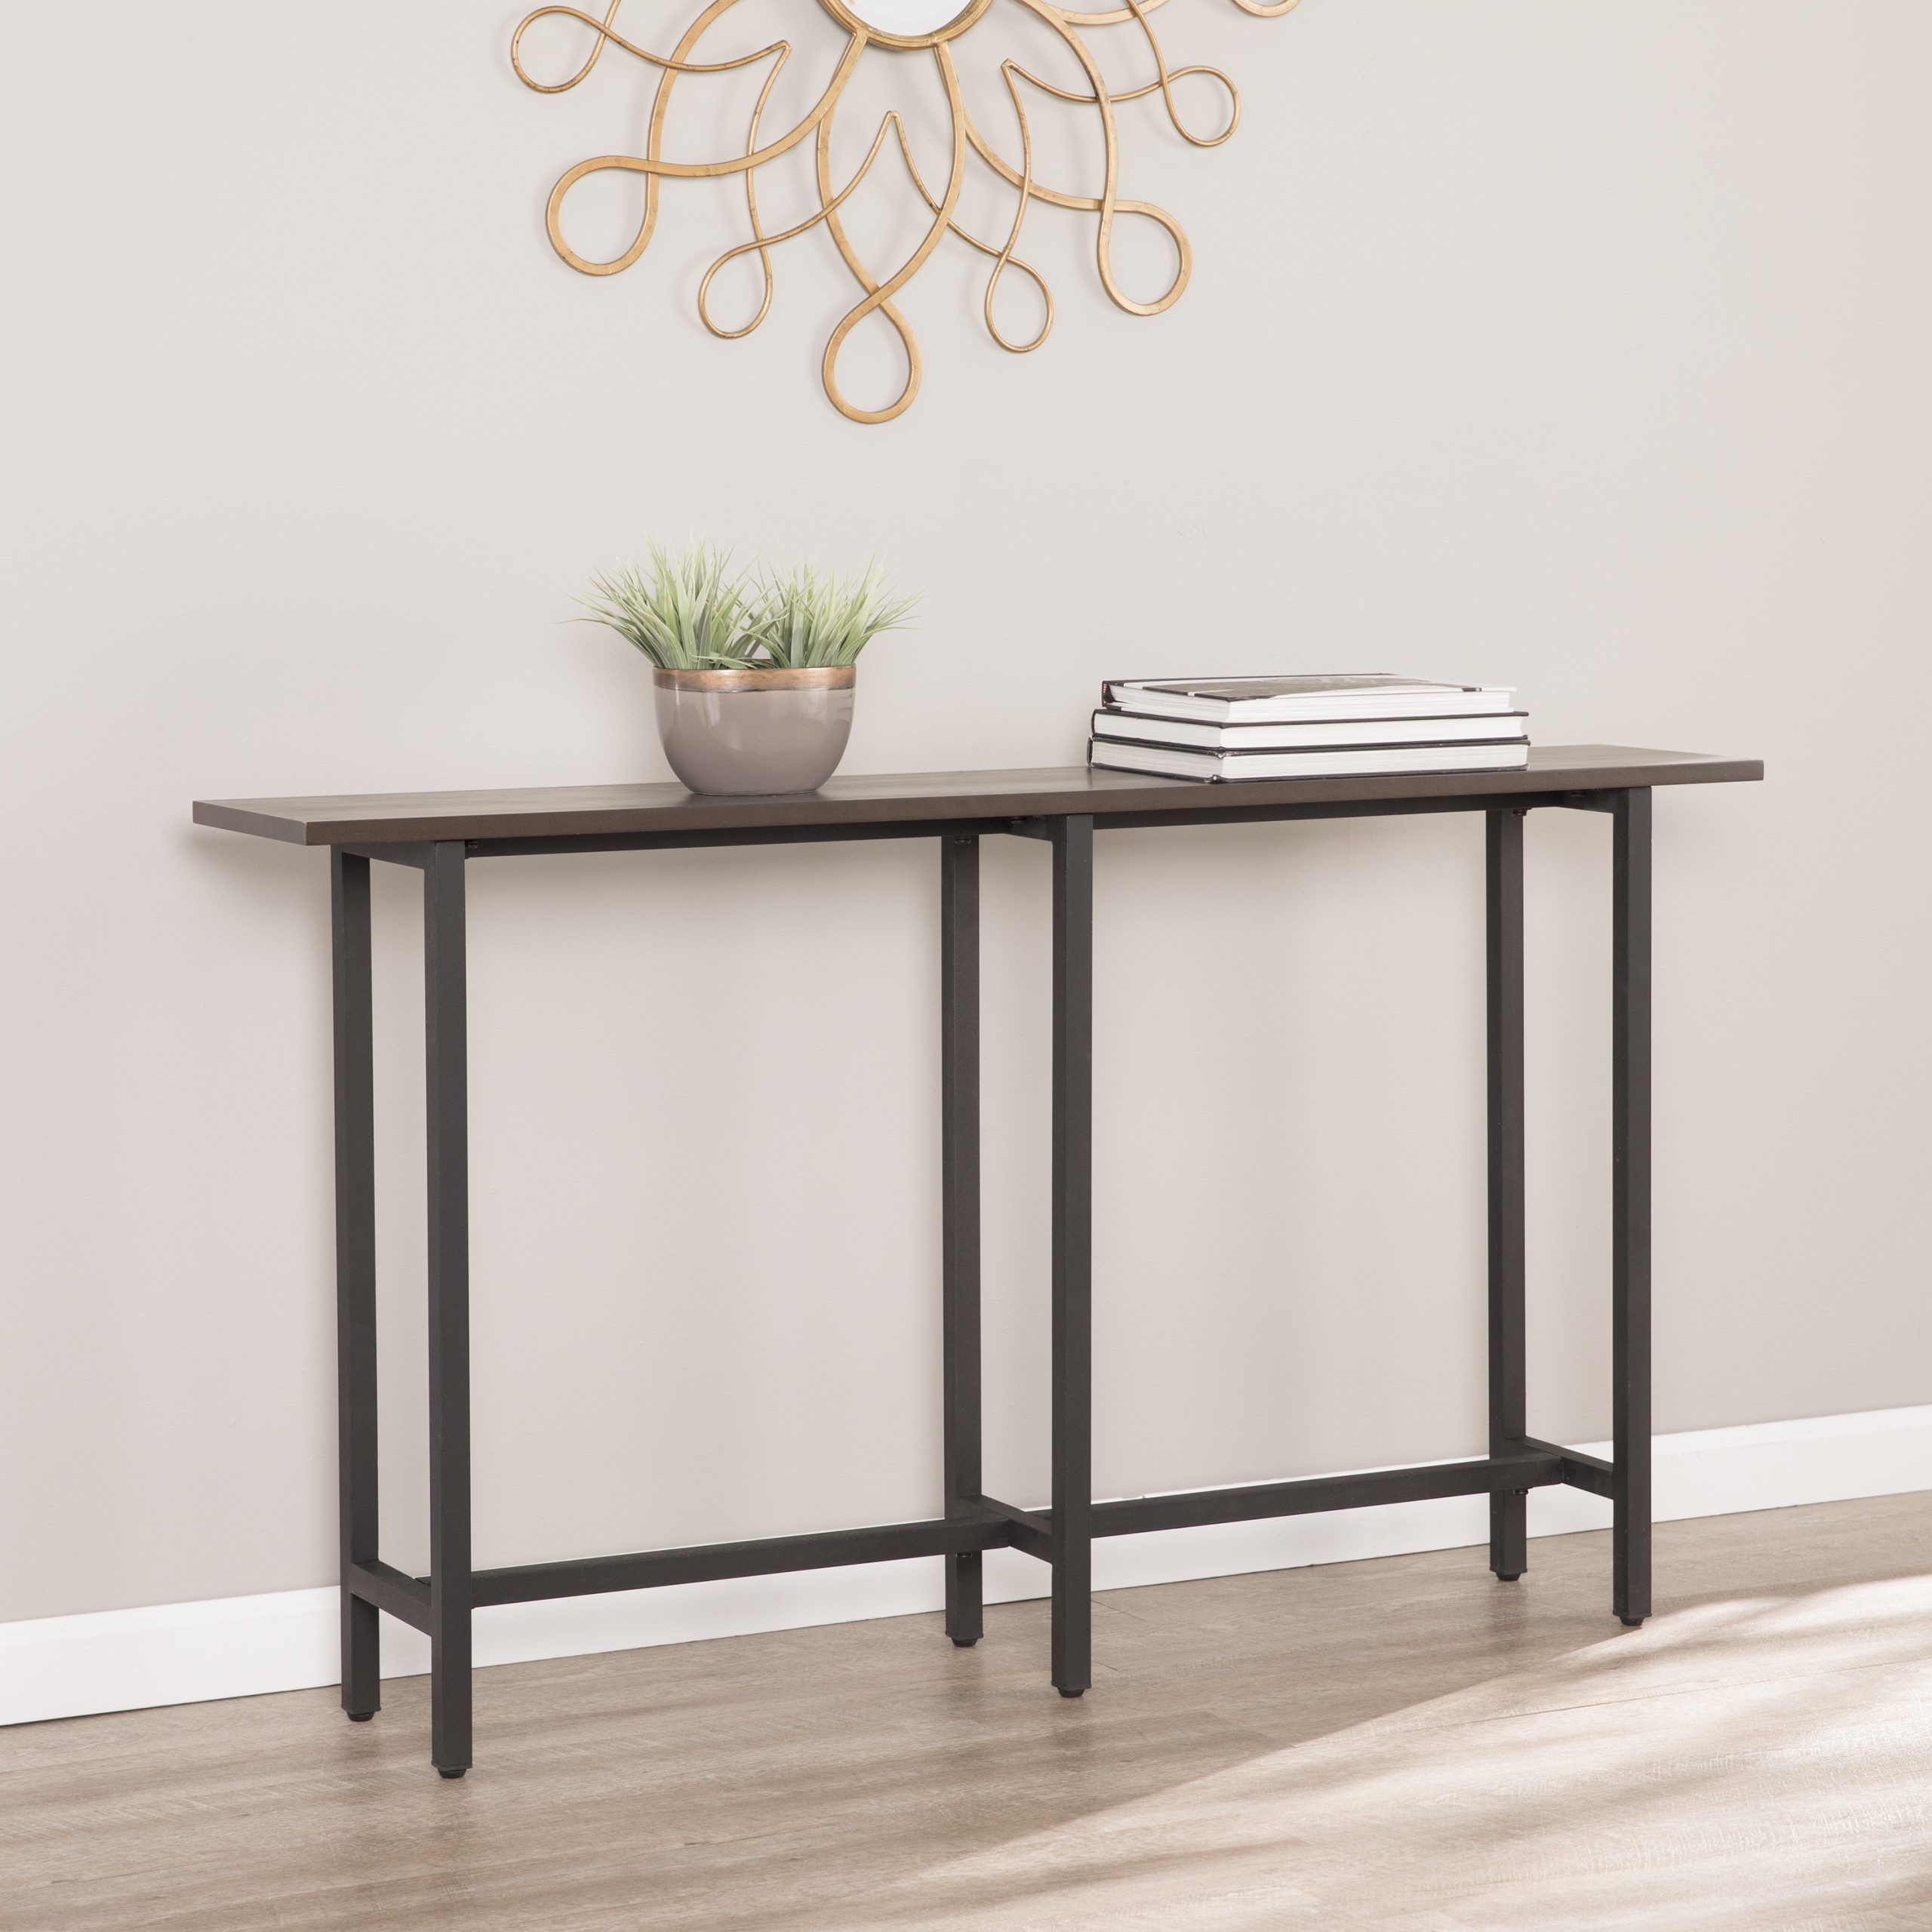 Most Recently Released Caviar Black Console Tables Inside Jorral Long Narrow Console Table, Black – Walmart (View 5 of 10)